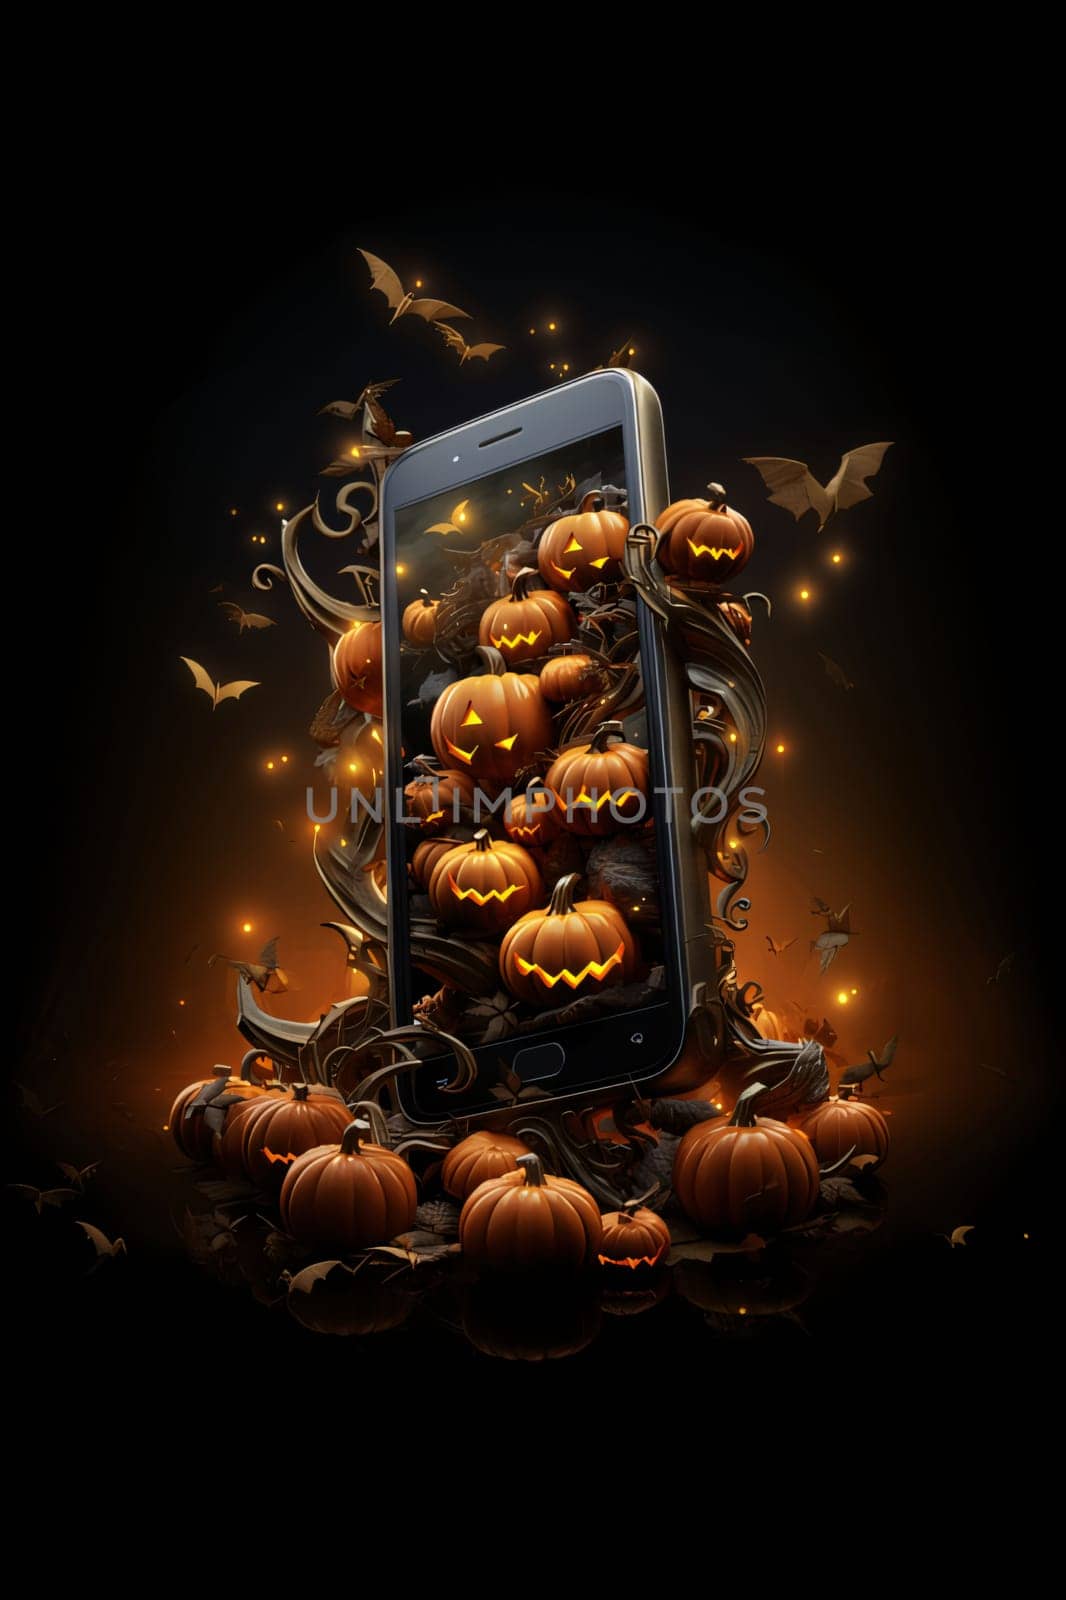 Smartphone screen: Halloween holiday background with mobile phone and pumpkins. Vector illustration.